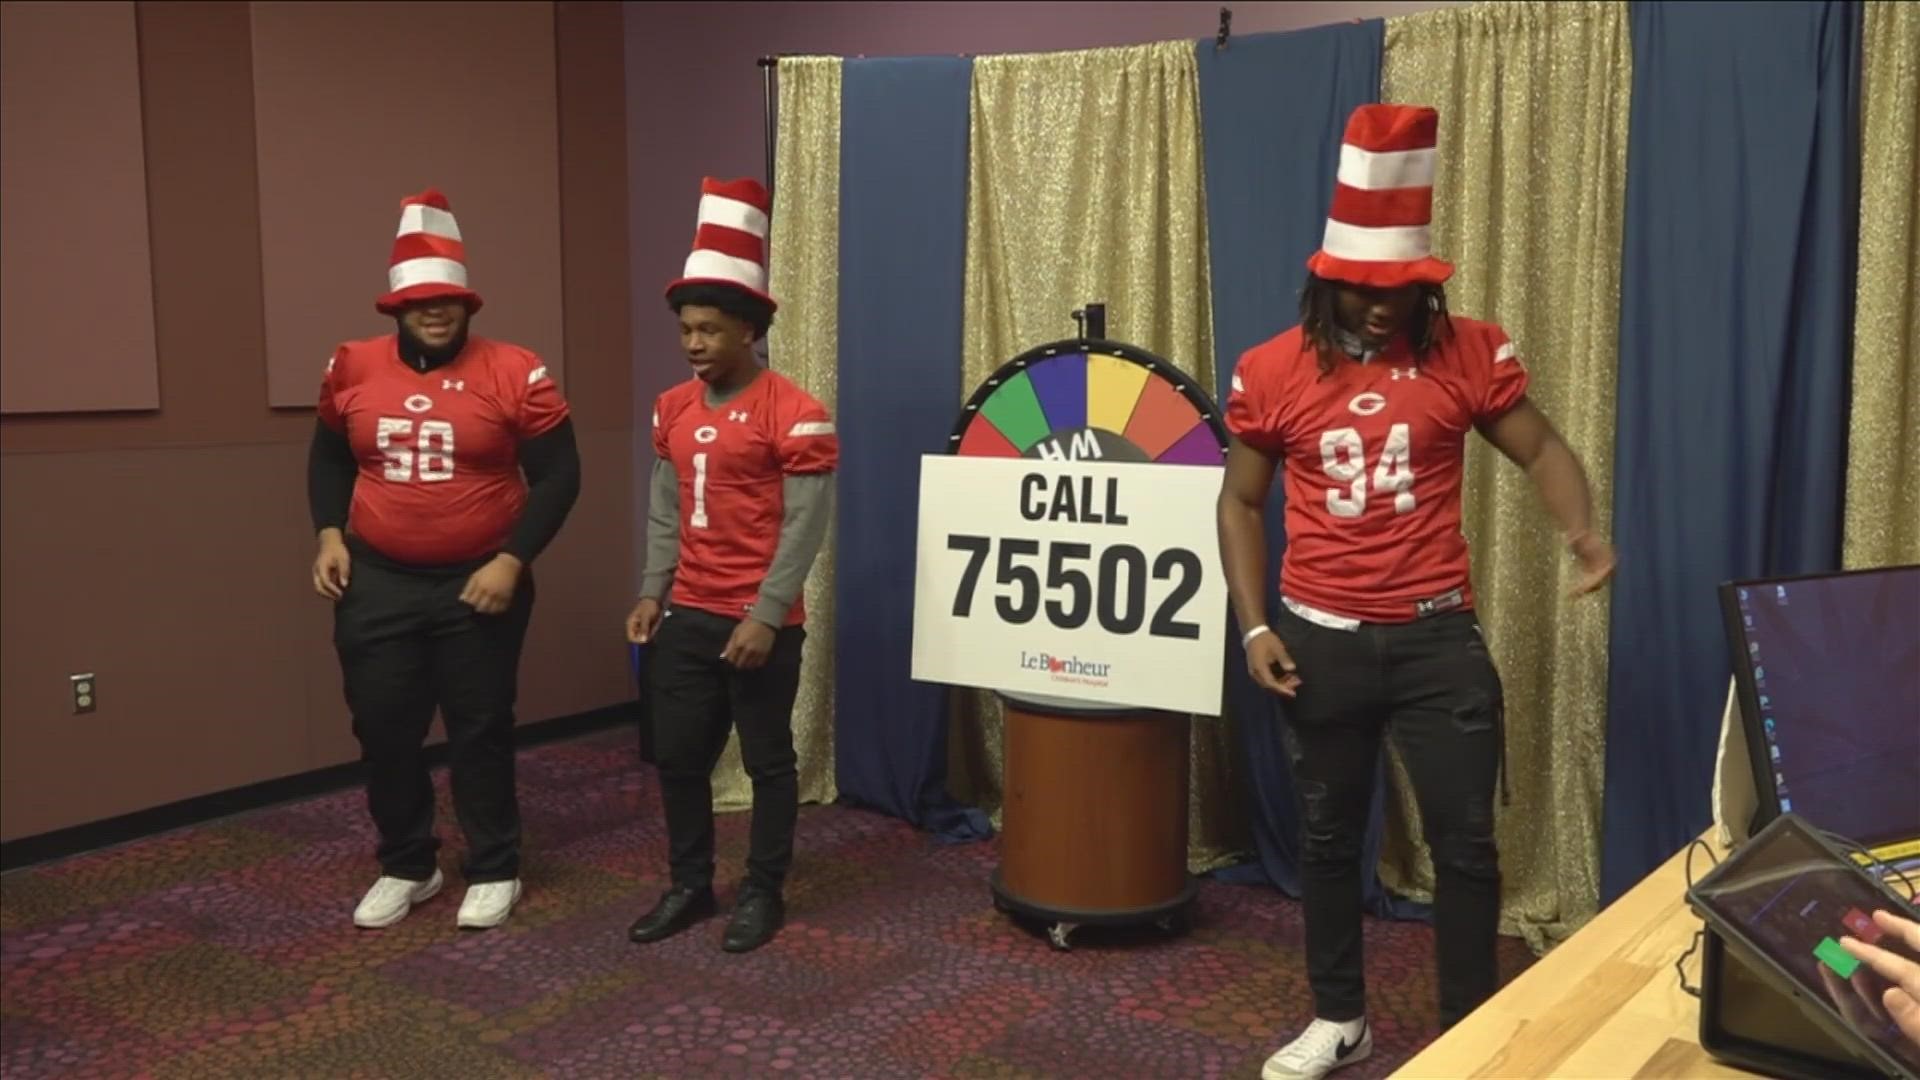 The players and patients joined forces for a game of ‘Name That Tune,’ with the athletes dressing up and lip-syncing the tunes for their own version of the show.